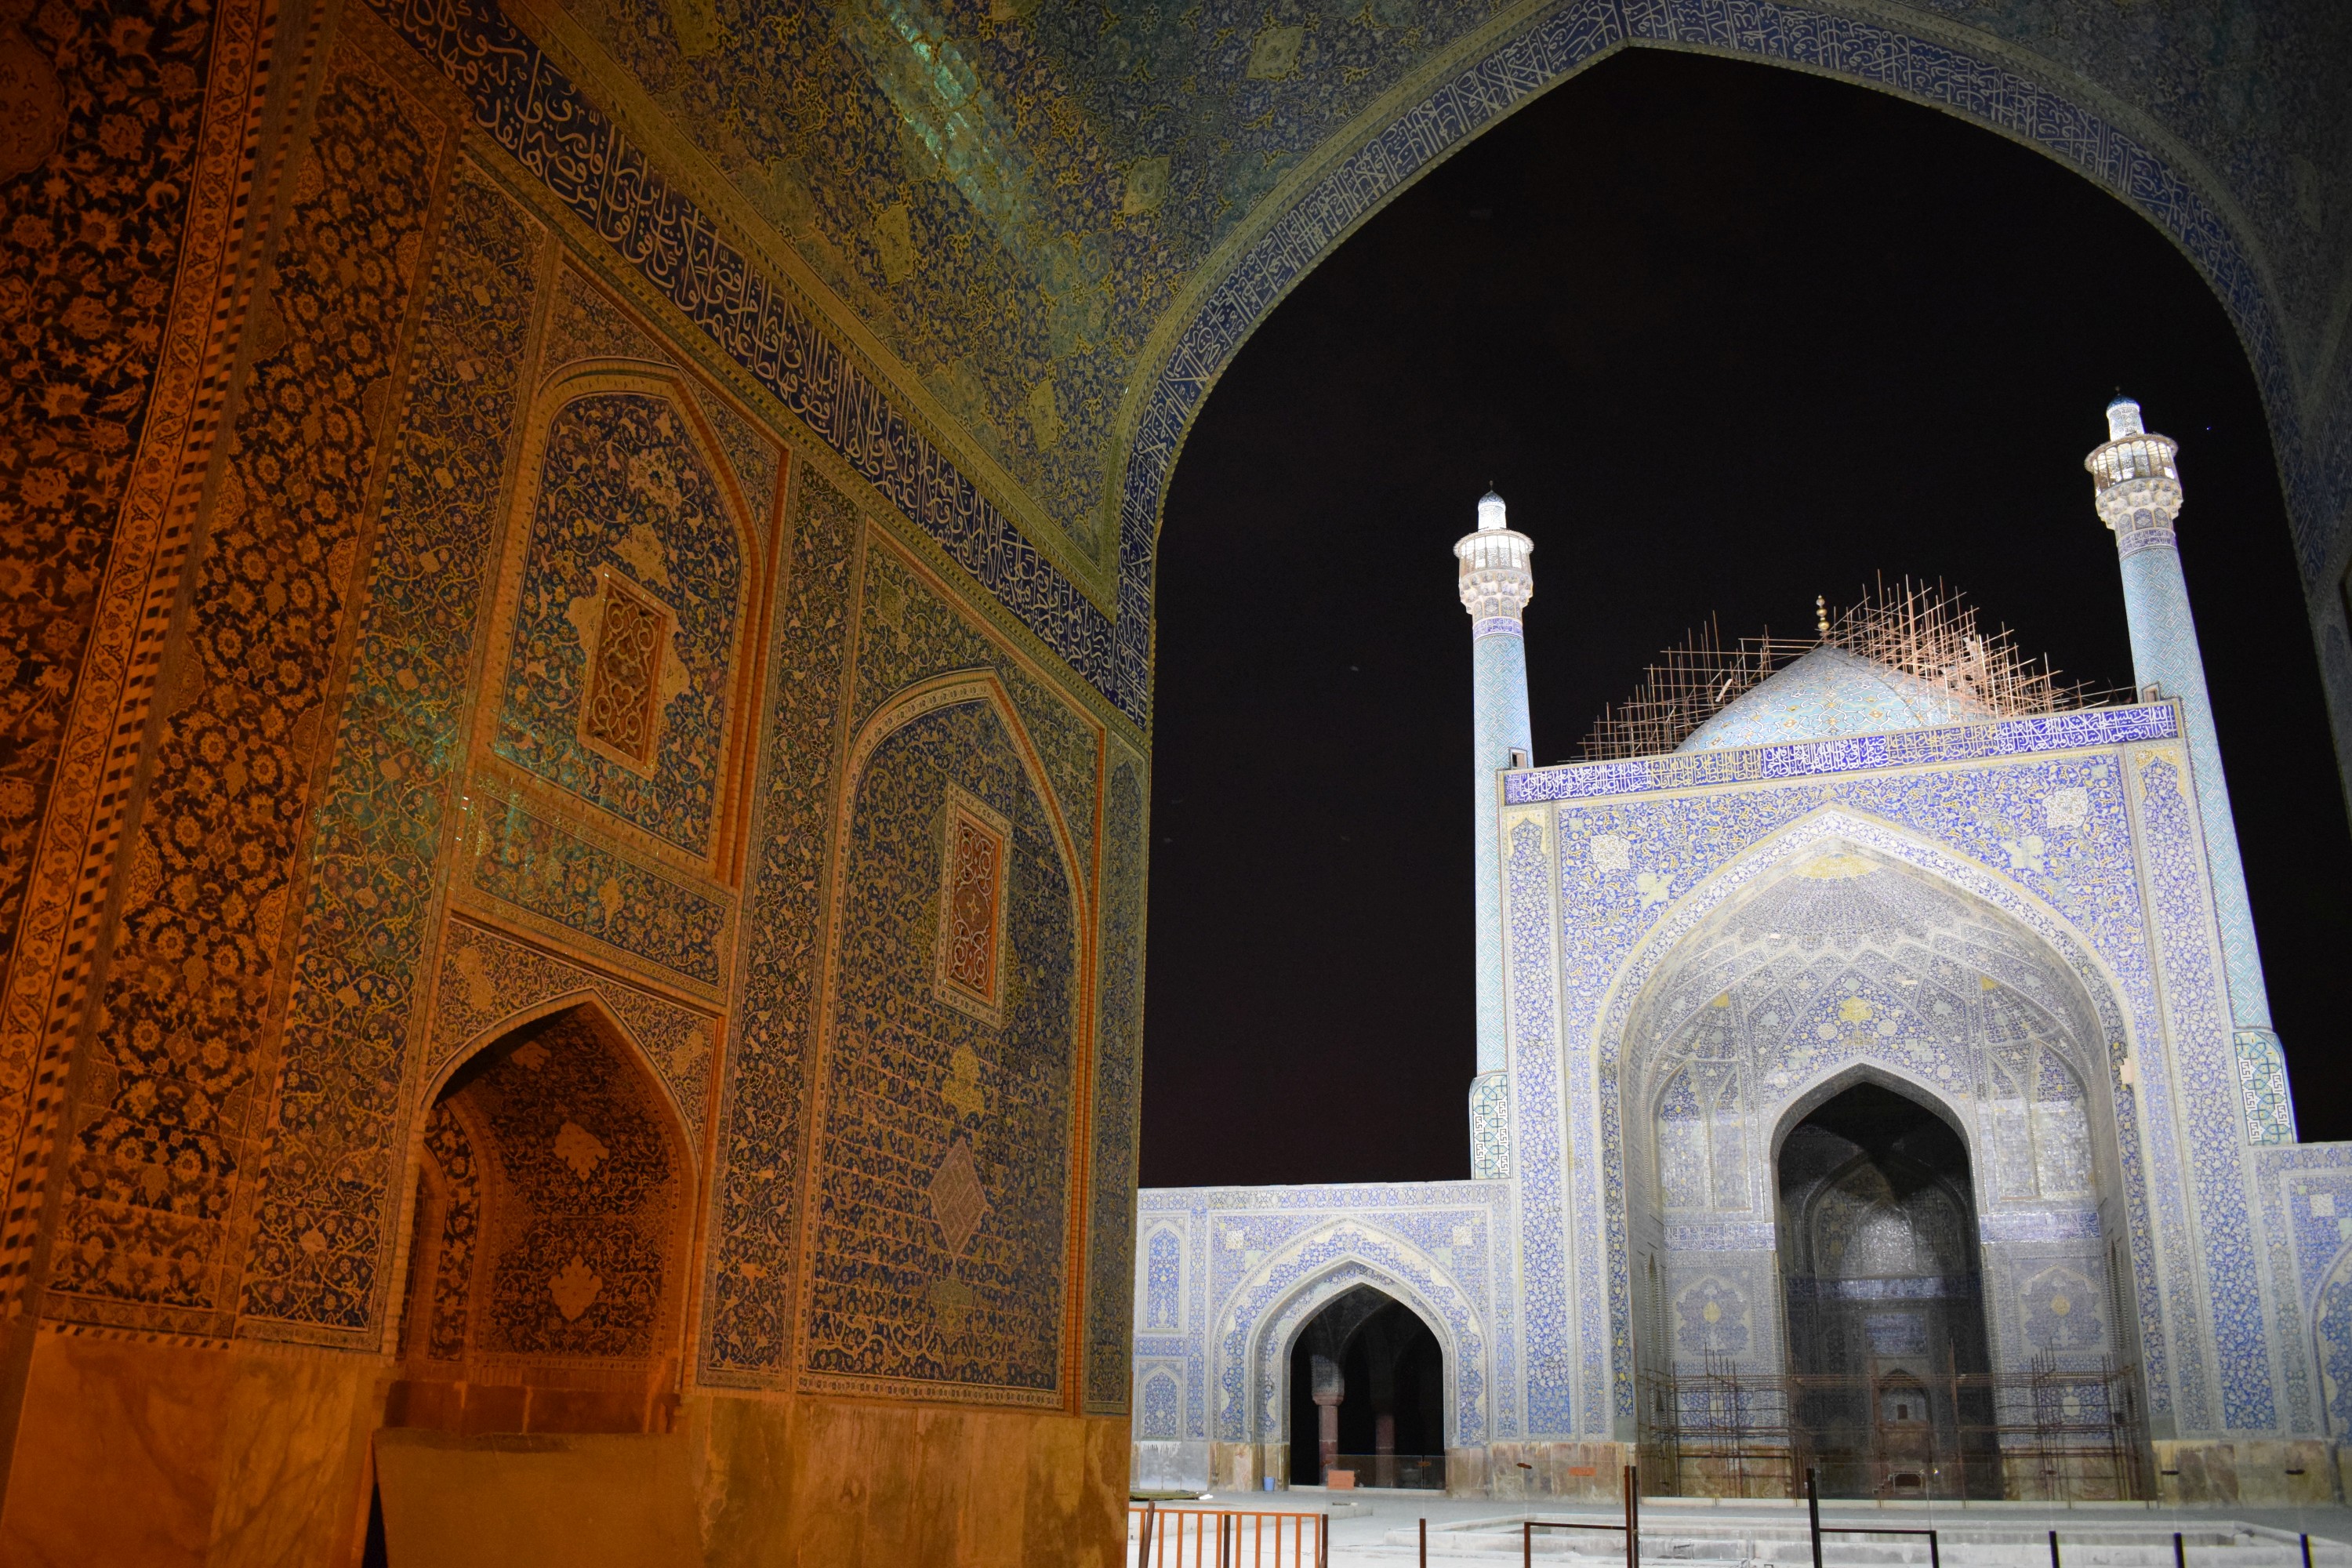 Esfahan at sunset and night